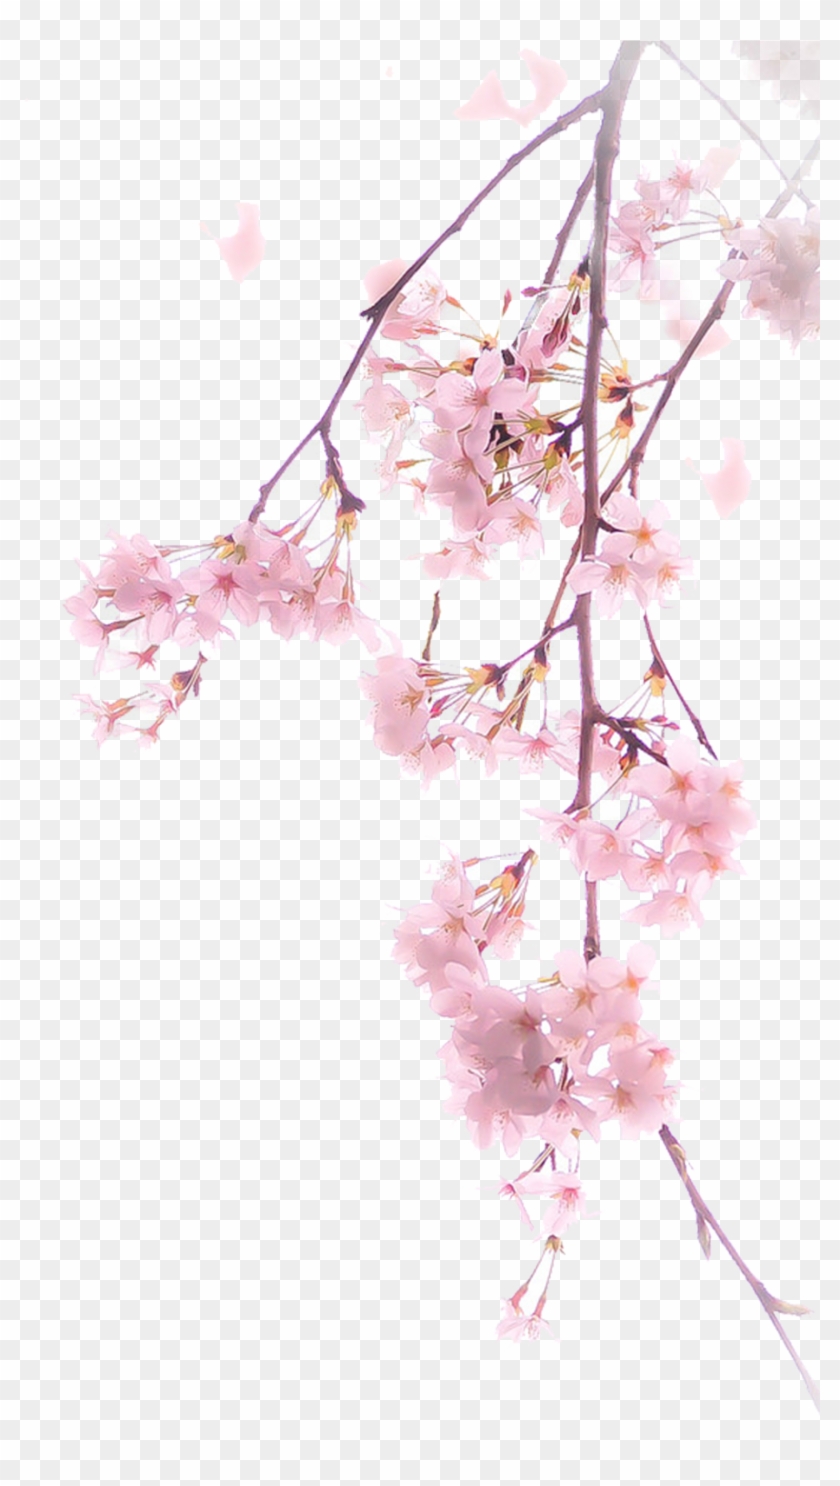 The Branch Of Cherry Blossoms, Png V - Cherry Blossom Illustration Png #762370